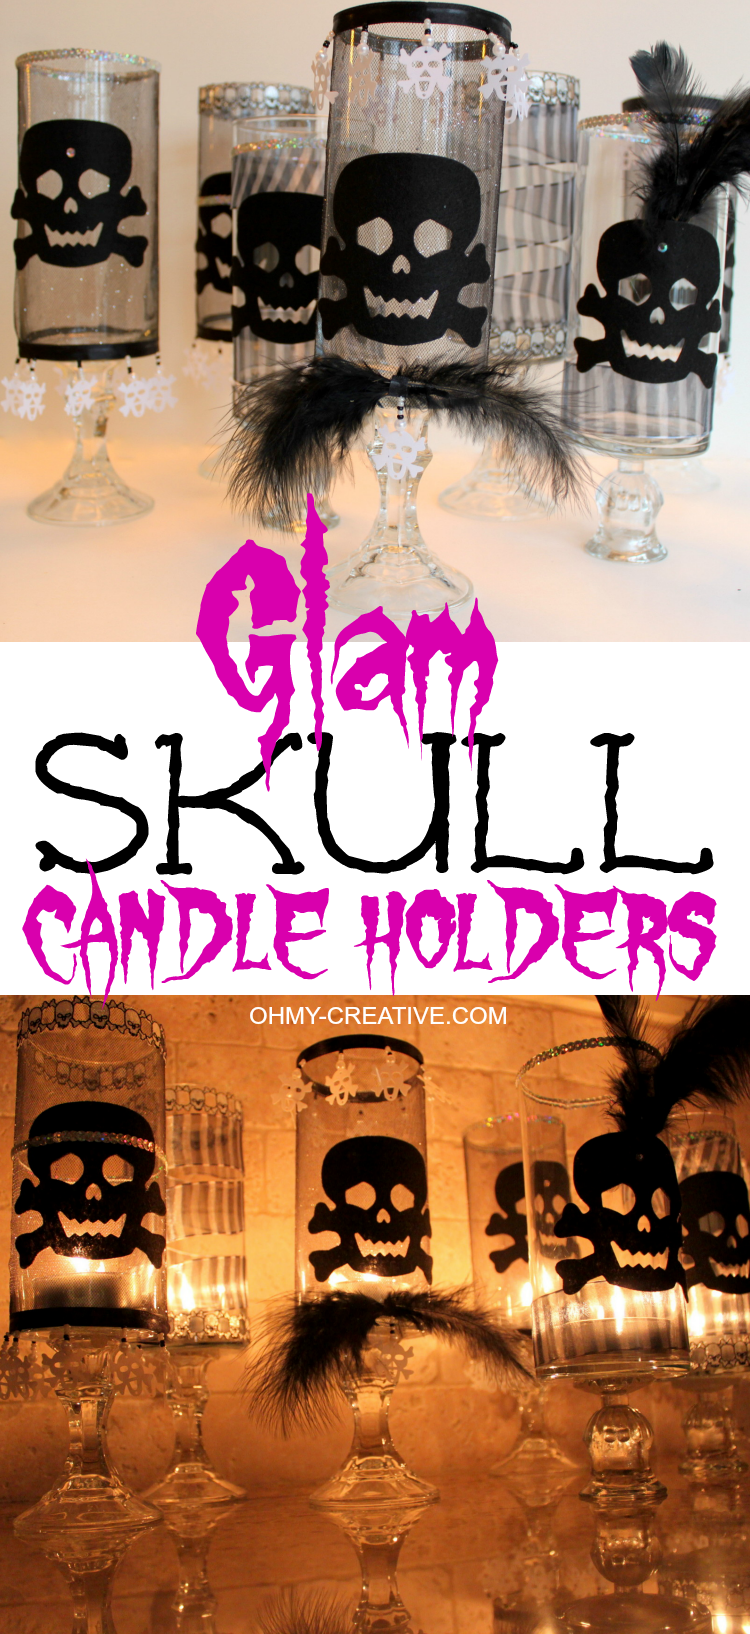 These Glam Halloween Skull Candle Holders are a perfect dollar store Halloween craft! With a few additional Halloween trims you can add a spooktacular glow to any party!  |  OHMY-CREATIVE.COM